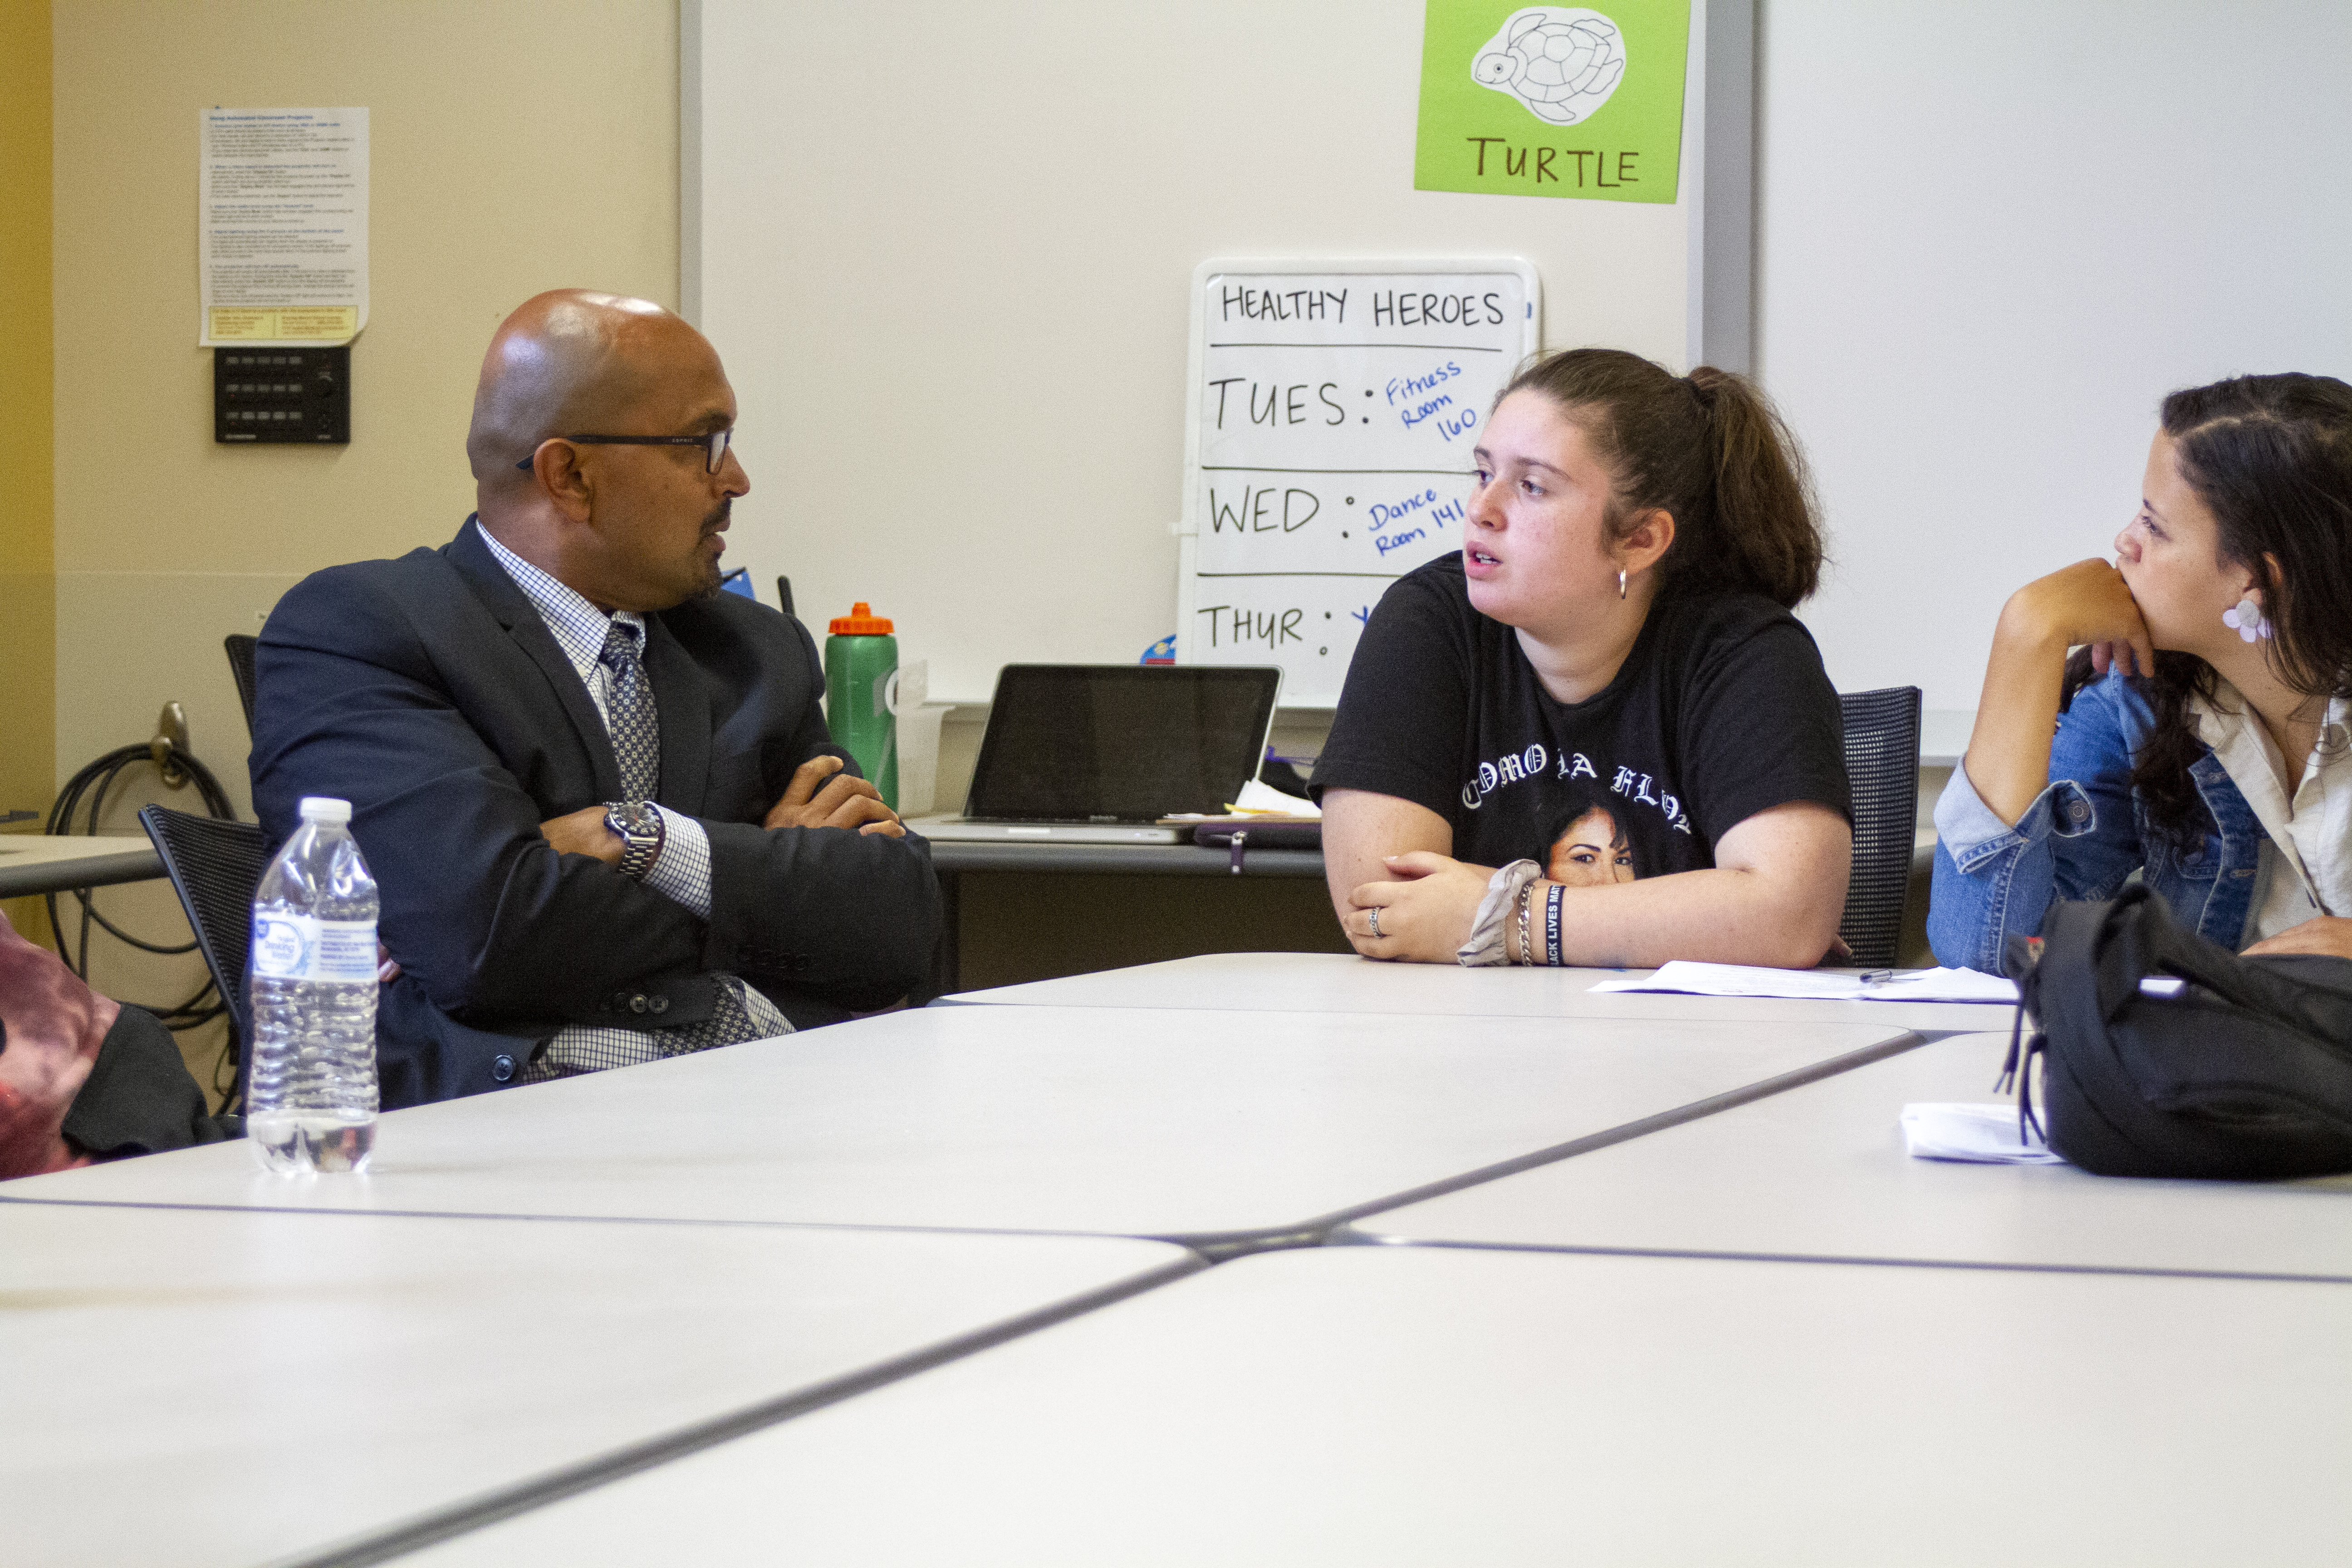 The Dean of the Warner School speaking with a young student at a table in the classroom